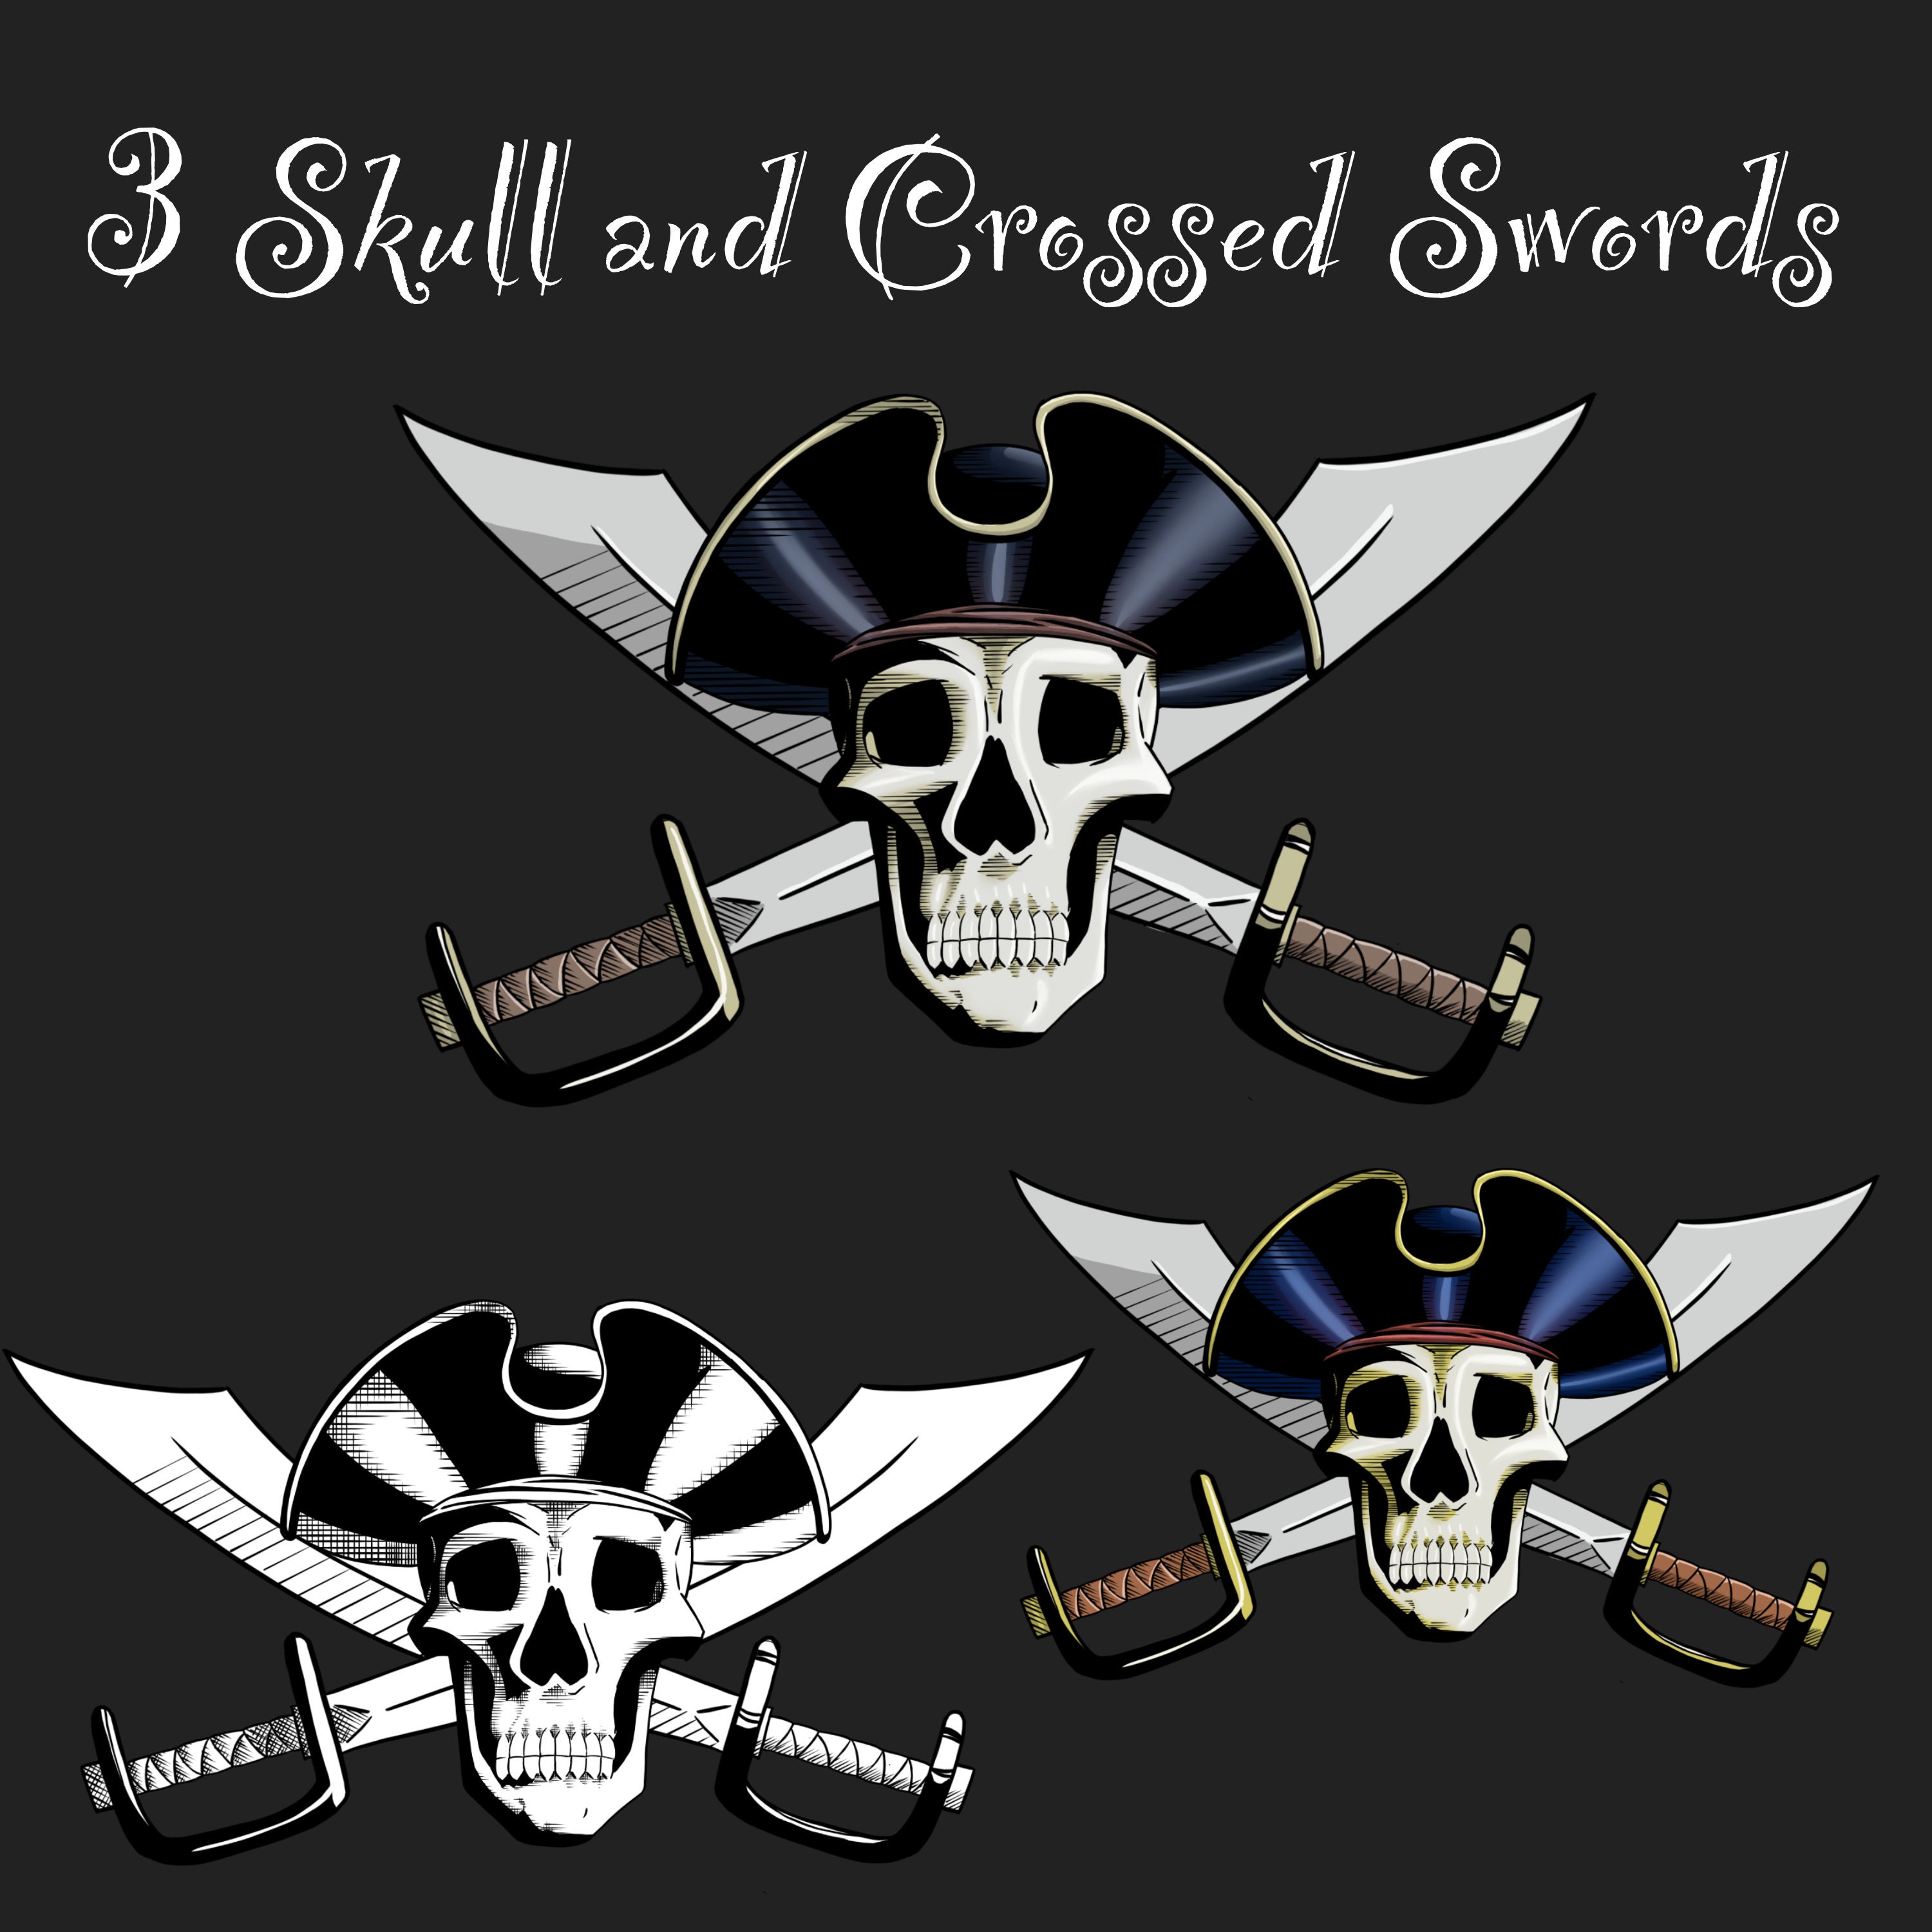 White Pirate Skull with Crossed Swords Emblem